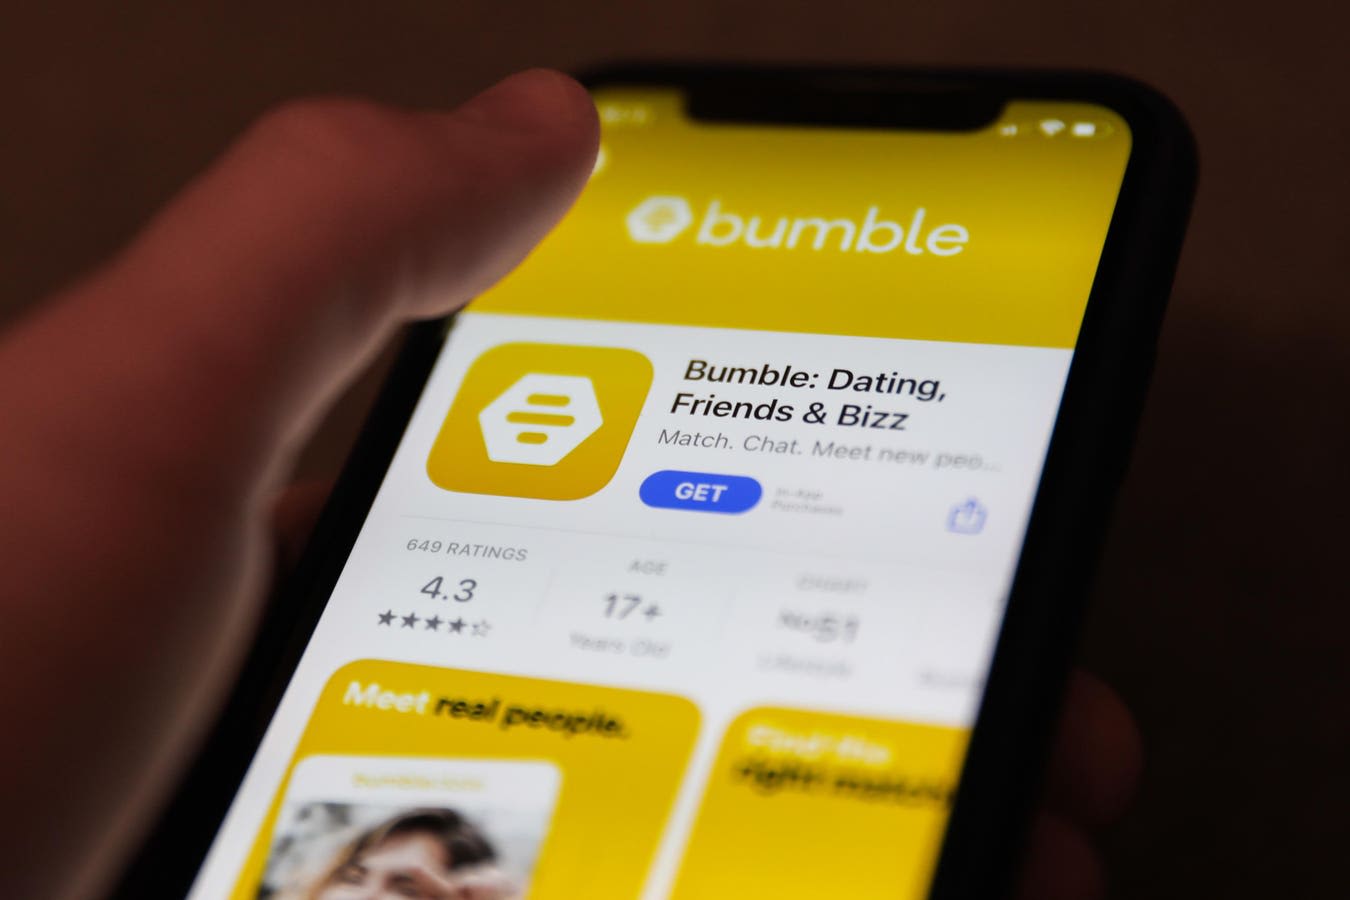 Men Can Now Initiate Conversations On Bumble—Here’s Why It Matters